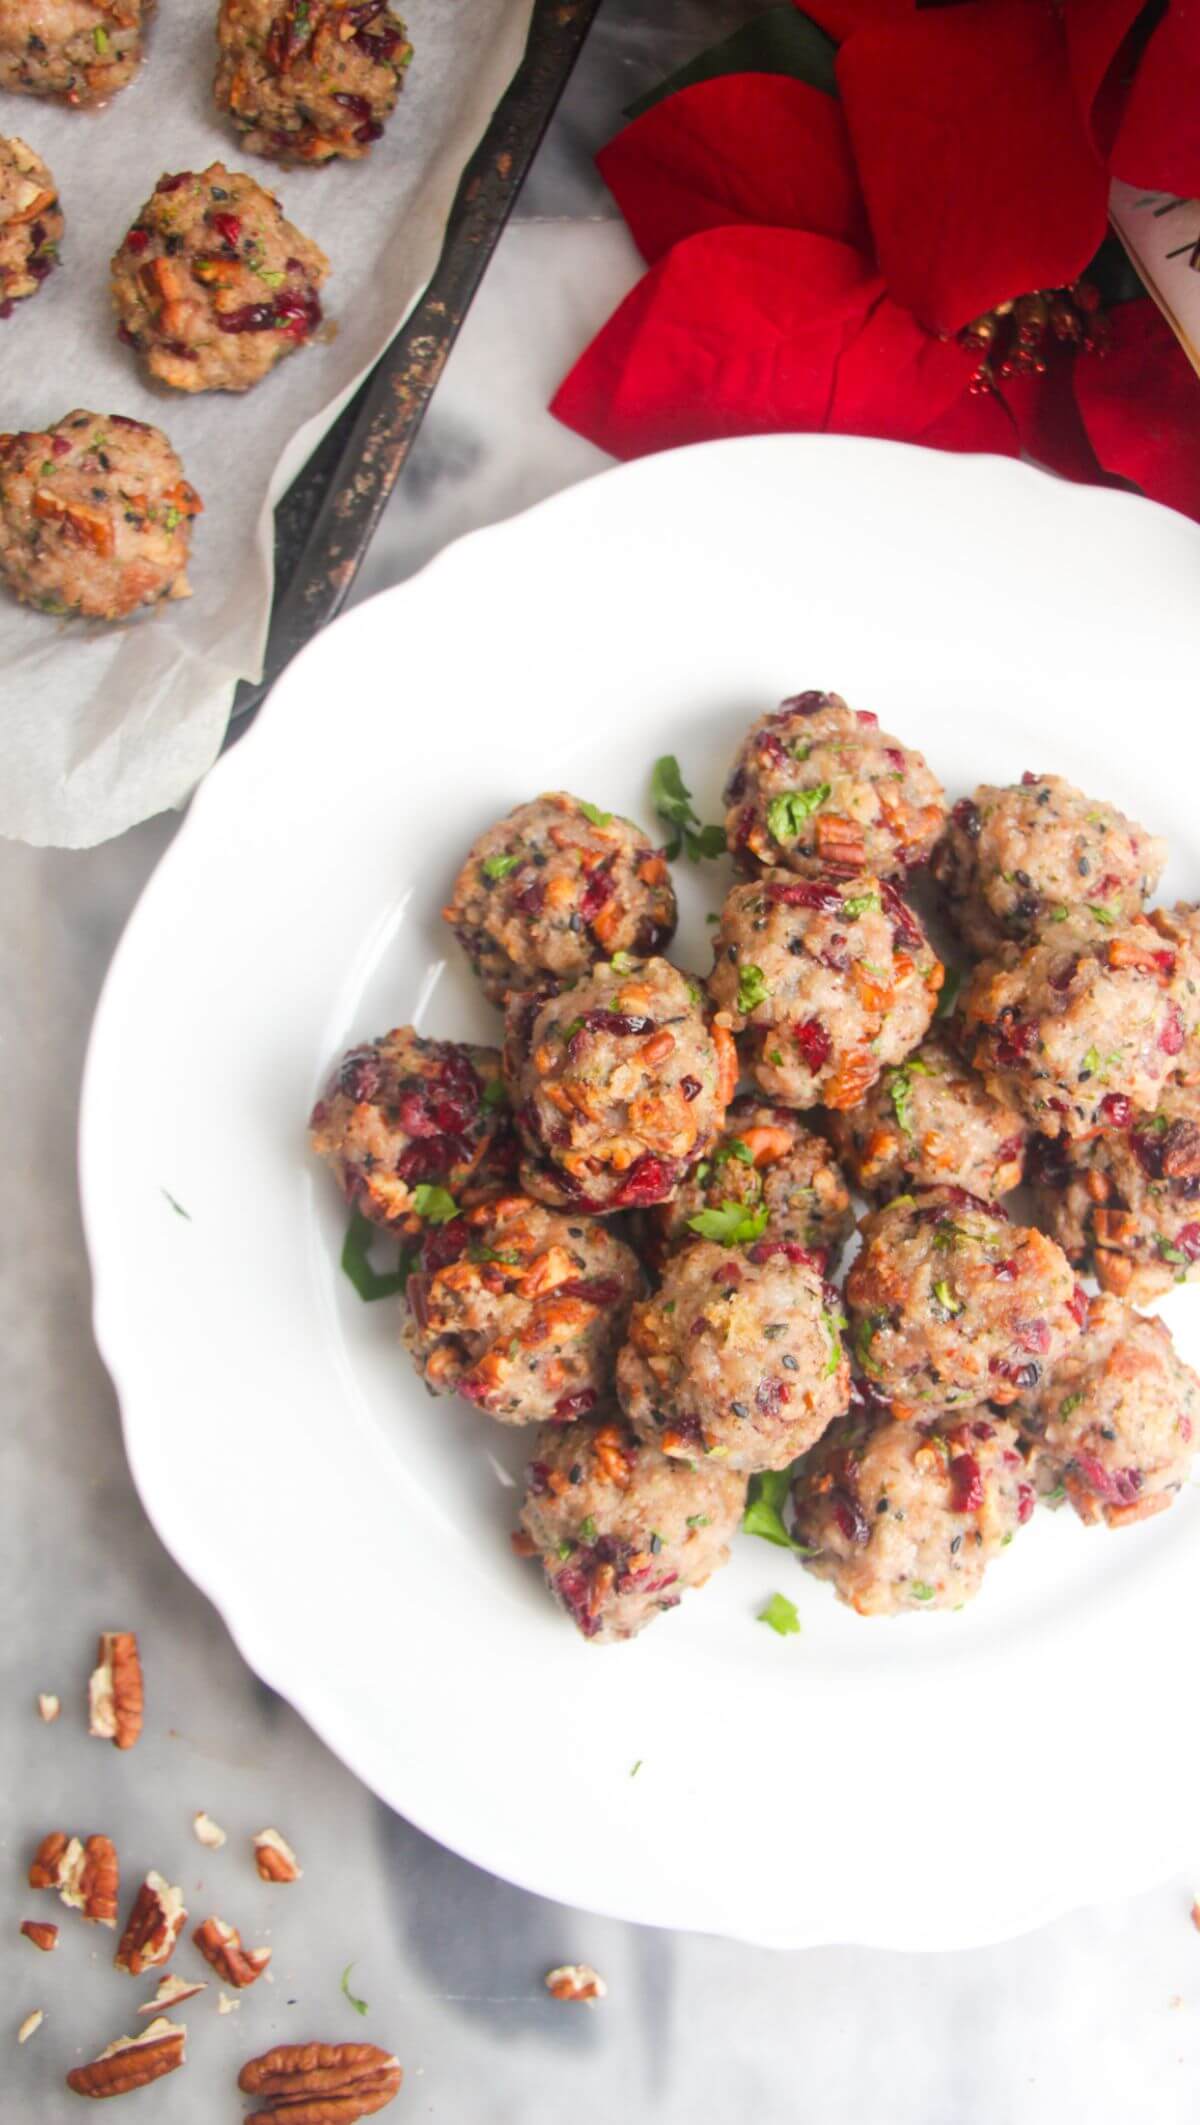 Cranberry pecan stuffing balls piled on a large white plate with more stuffing balls in the background.